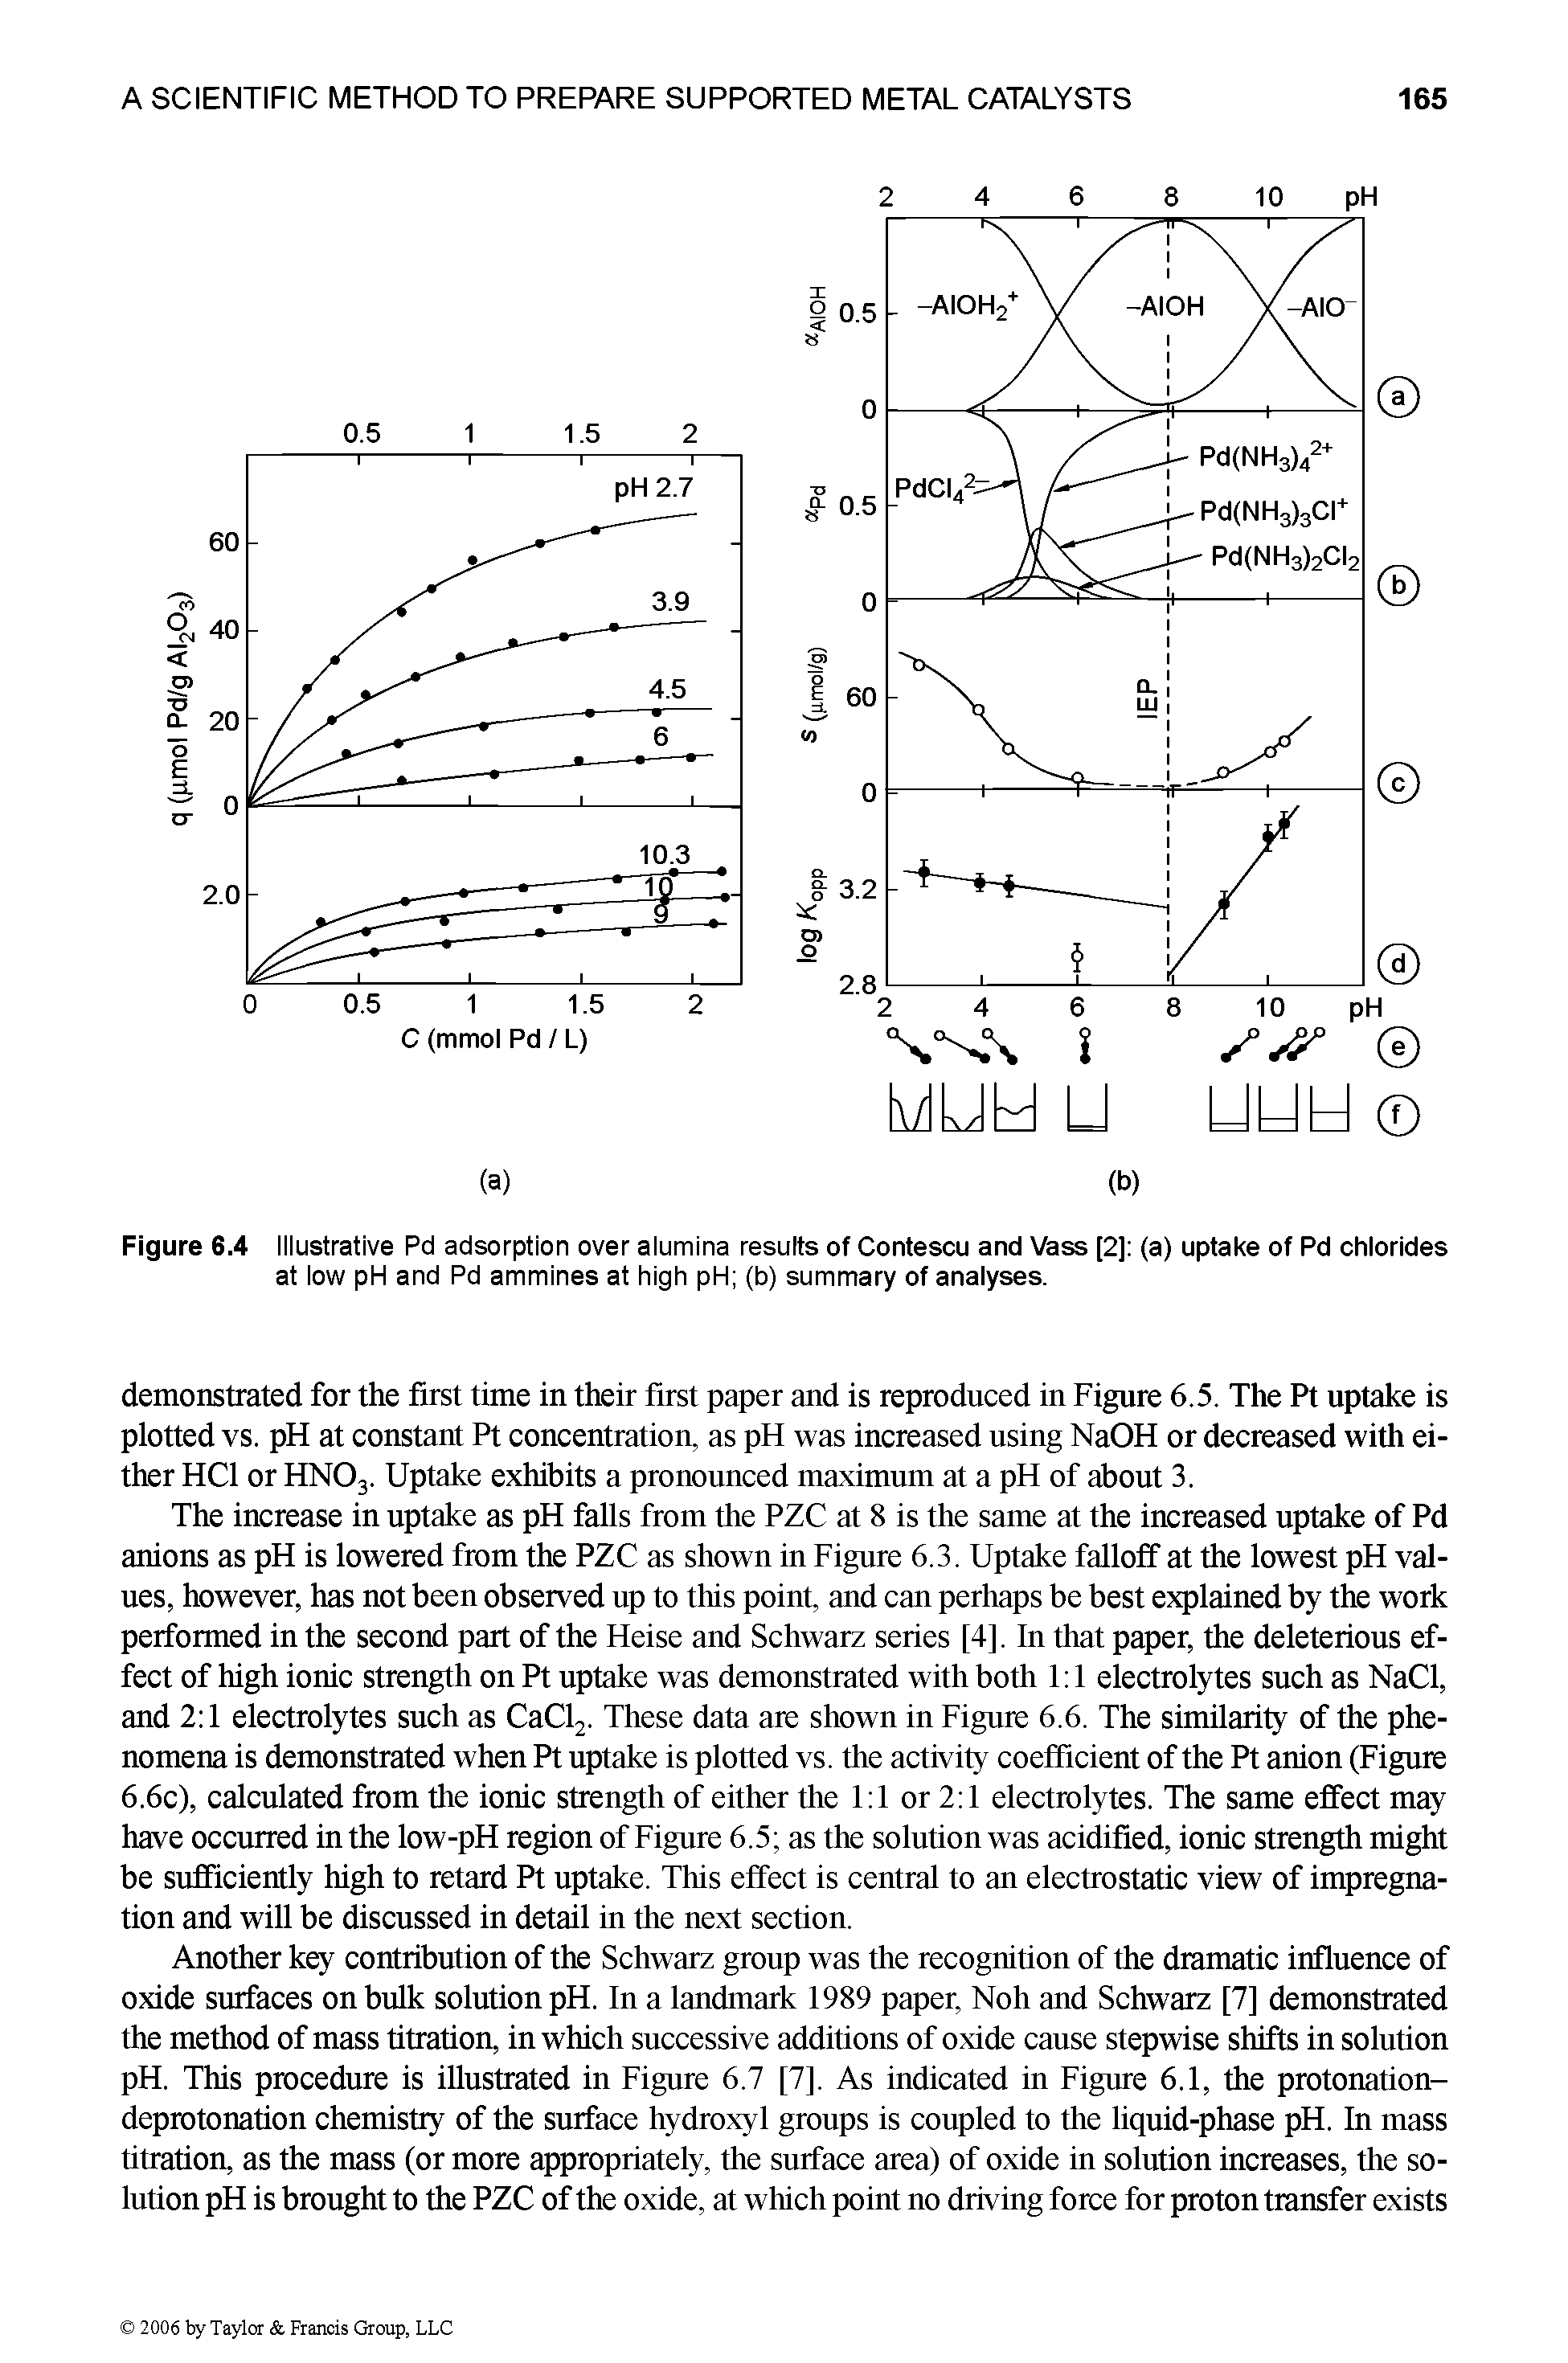 Figure 6.4 Illustrative Pd adsorption over alumina results of Contescu and Vass [2] (a) uptake of Pd chlorides at low pH and Pd ammines at high pH (b) summary of analyses.